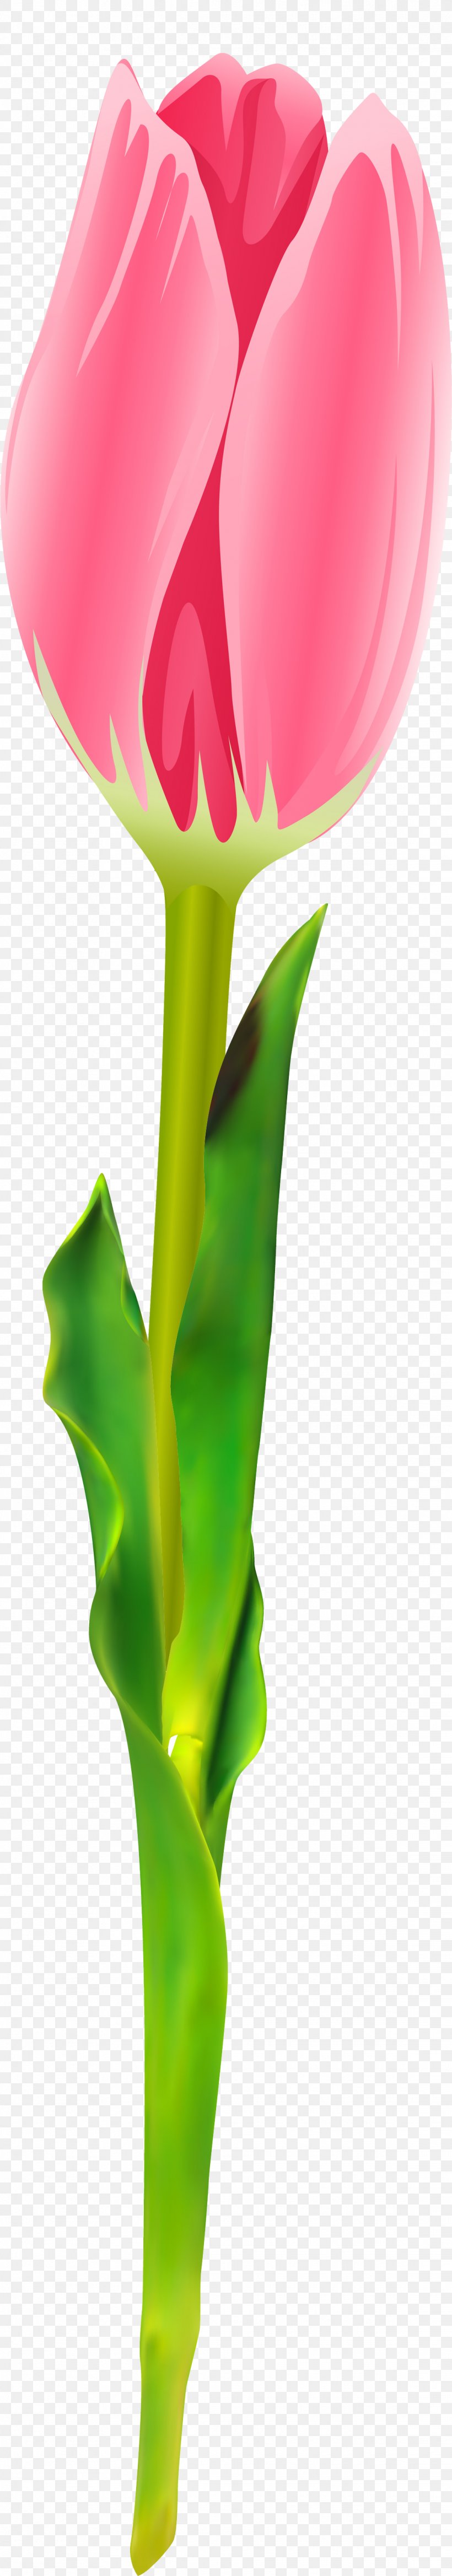 Cut Flowers Flowering Plant Tulip, PNG, 1119x6379px, Flower, Cut Flowers, Family, Flowering Plant, Flowerpot Download Free